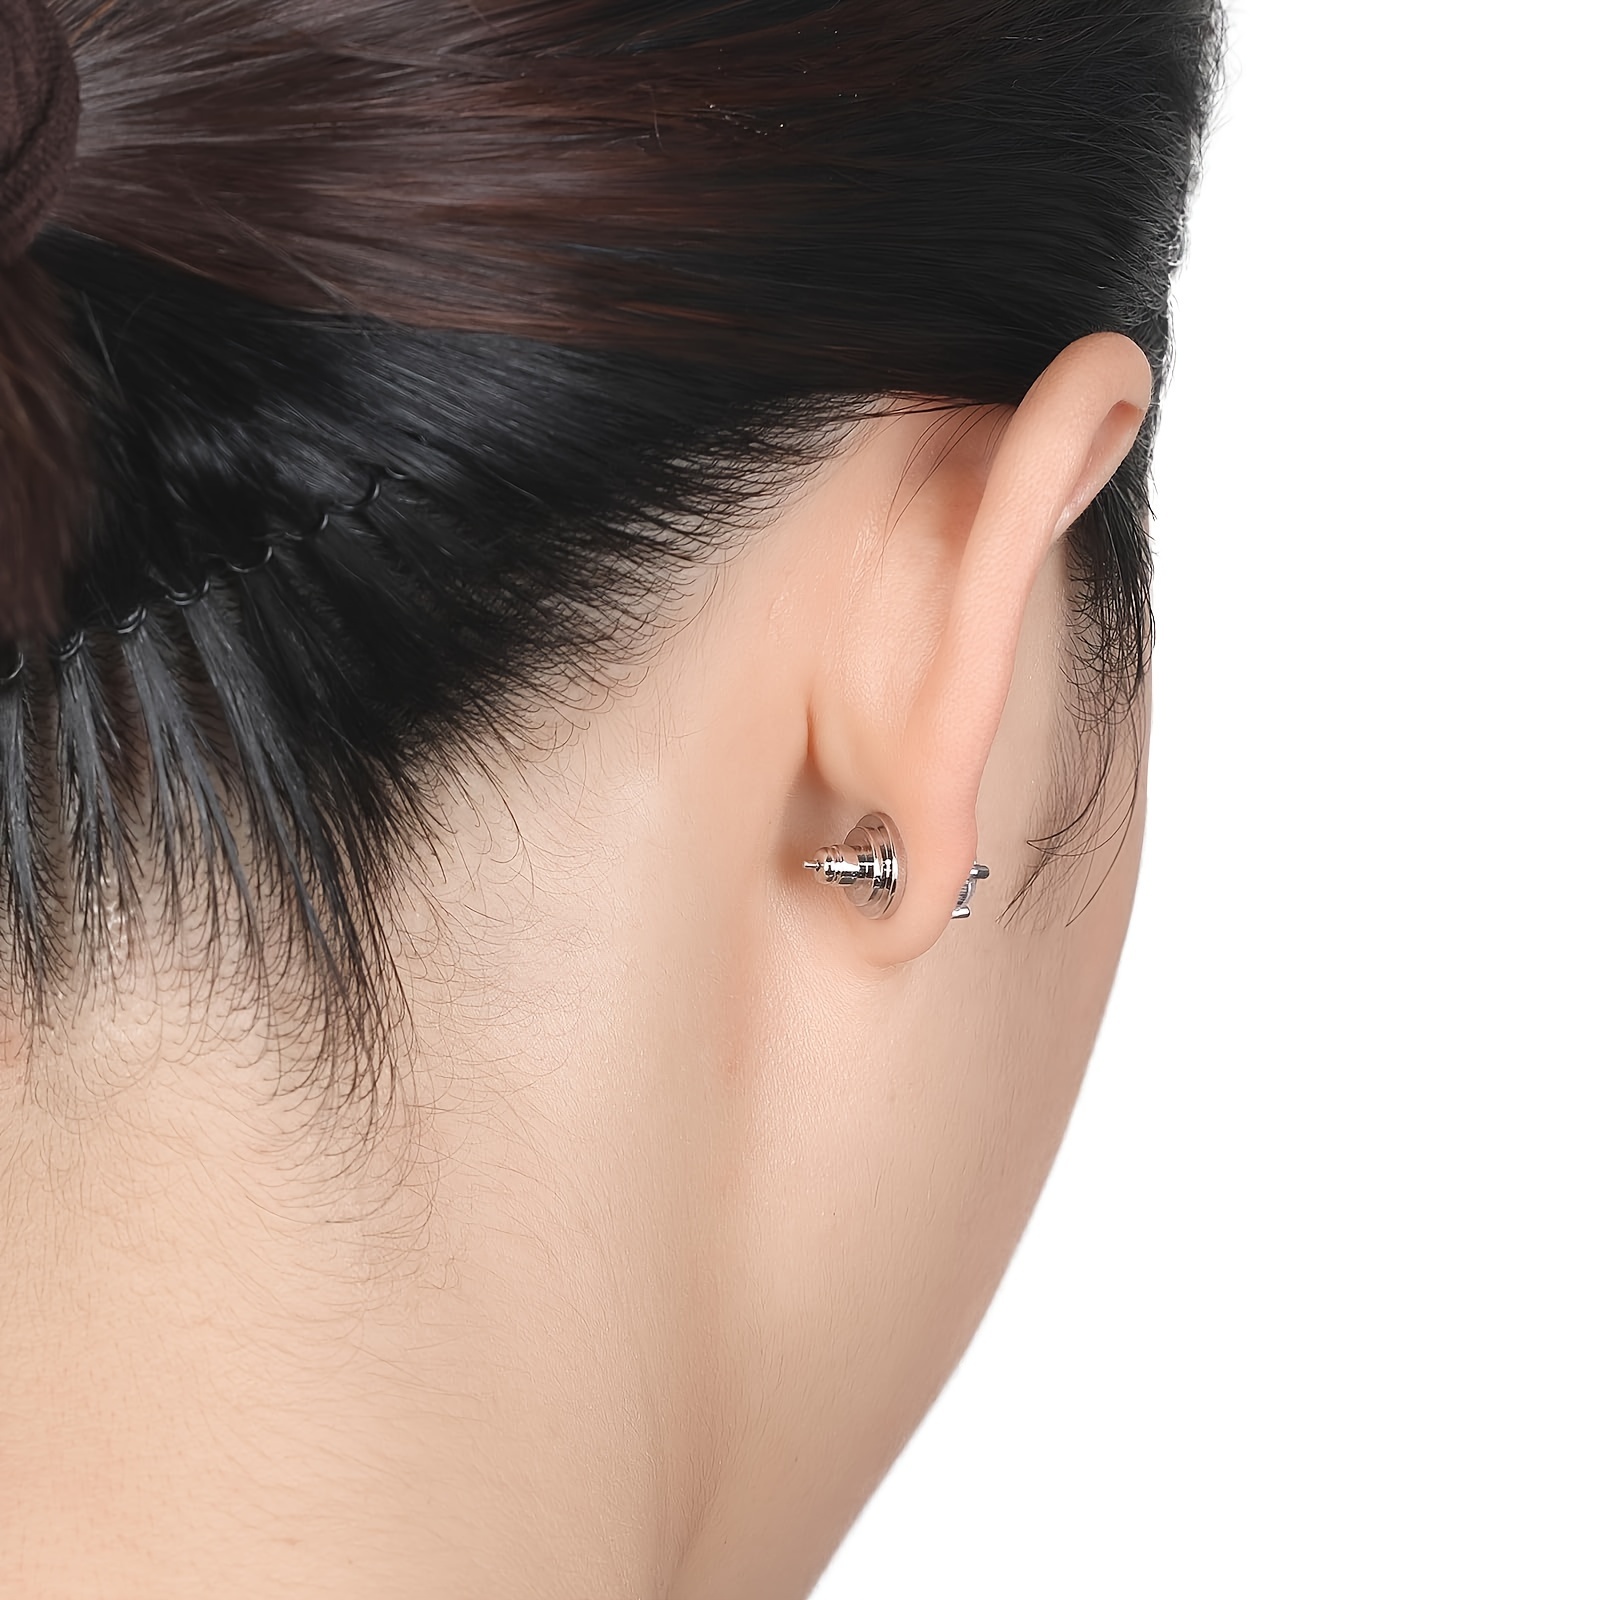 3 Pairs Earring Backs for Droopy Ears